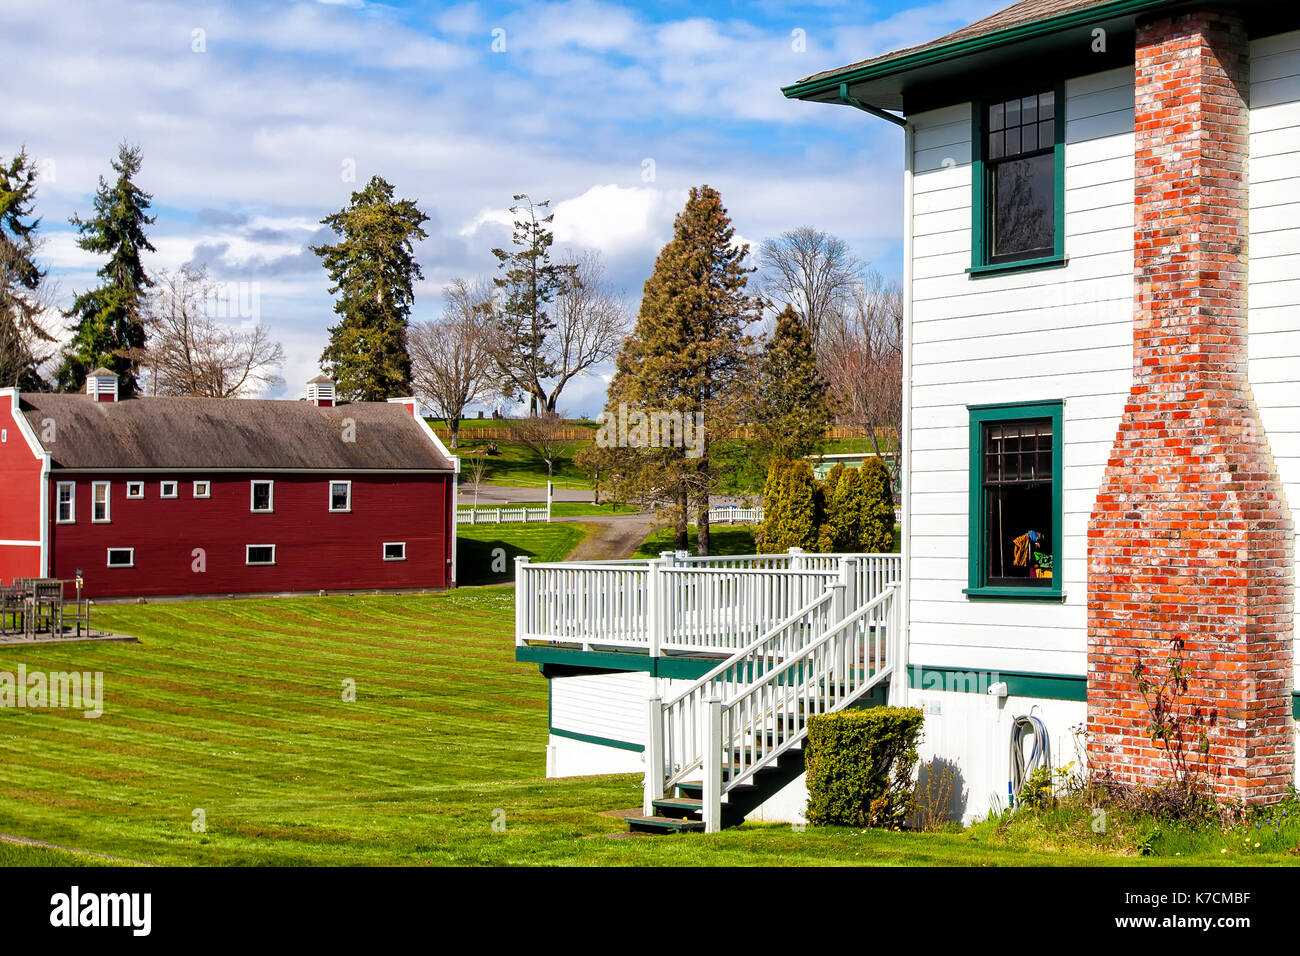 American farm house and red barn architecture. Exterior view. Location: Northwest USA, Olympic Peninsula, Port Gamble Stock Photo